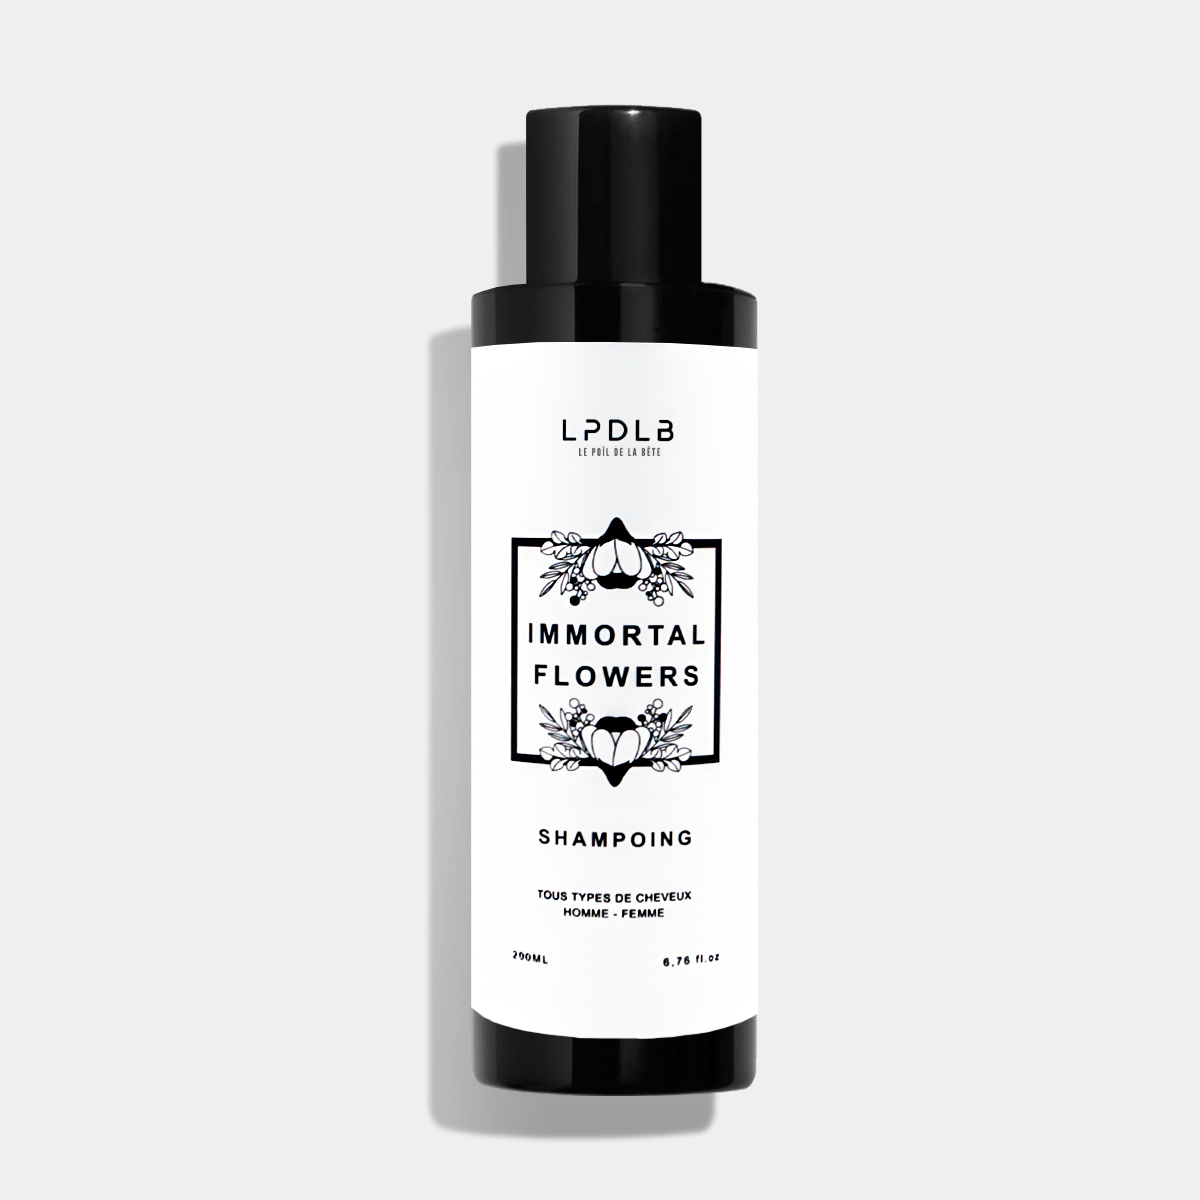 Bouteille de shampoing immortal flowers LPDLB